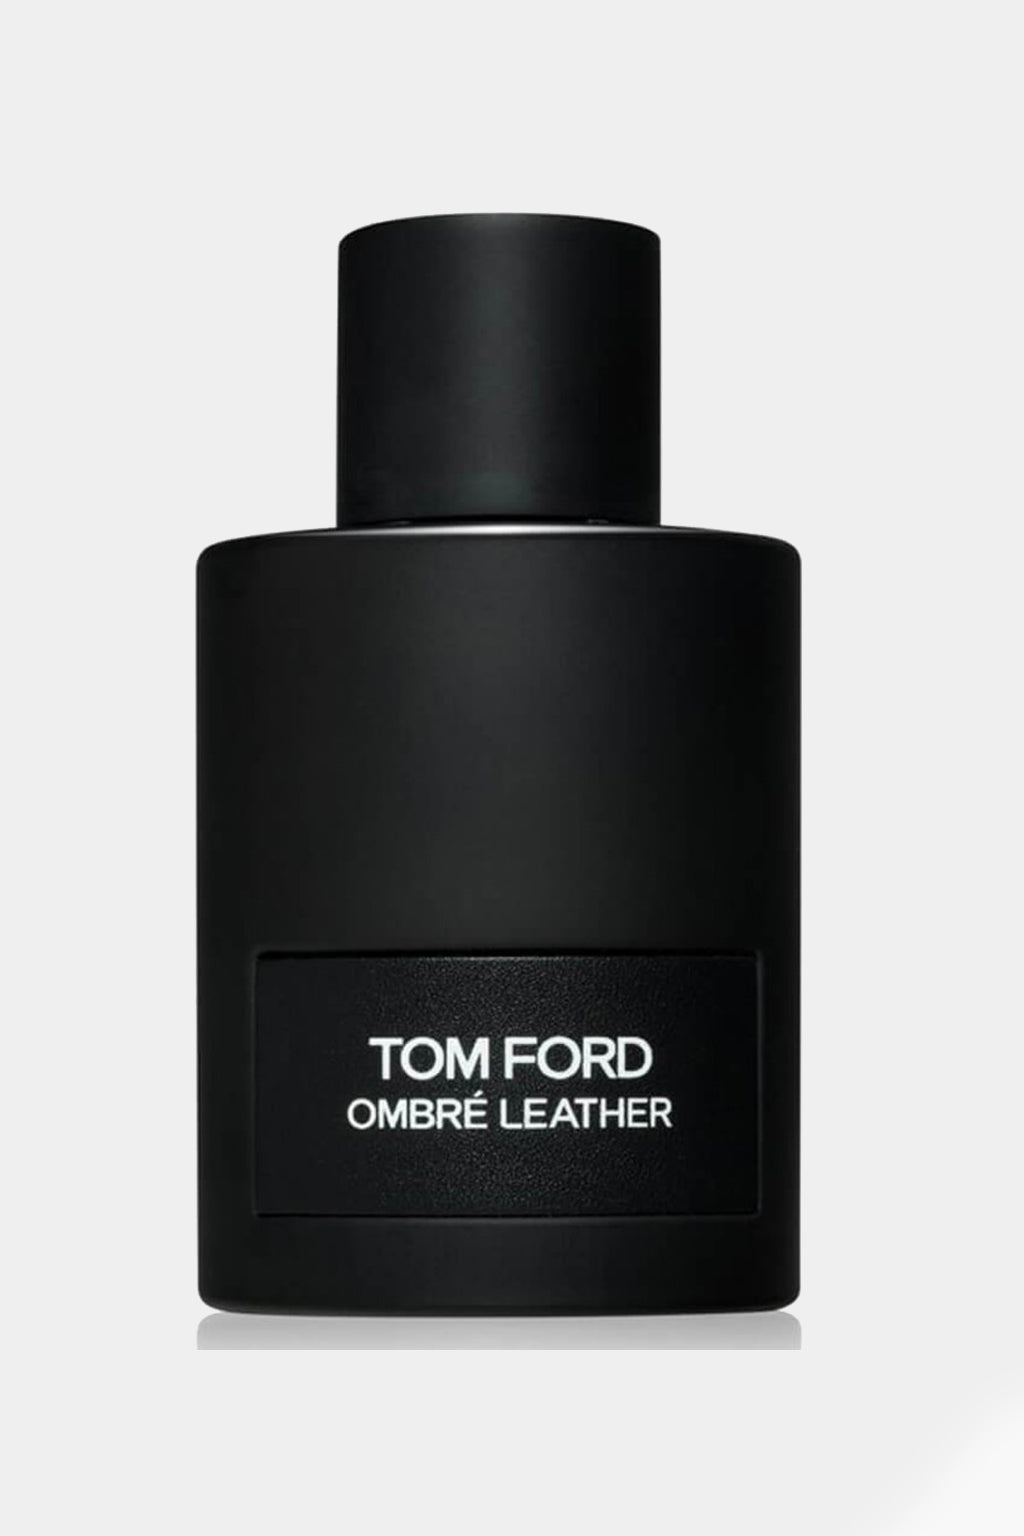 Tom Ford - Ombre Leather 100ml